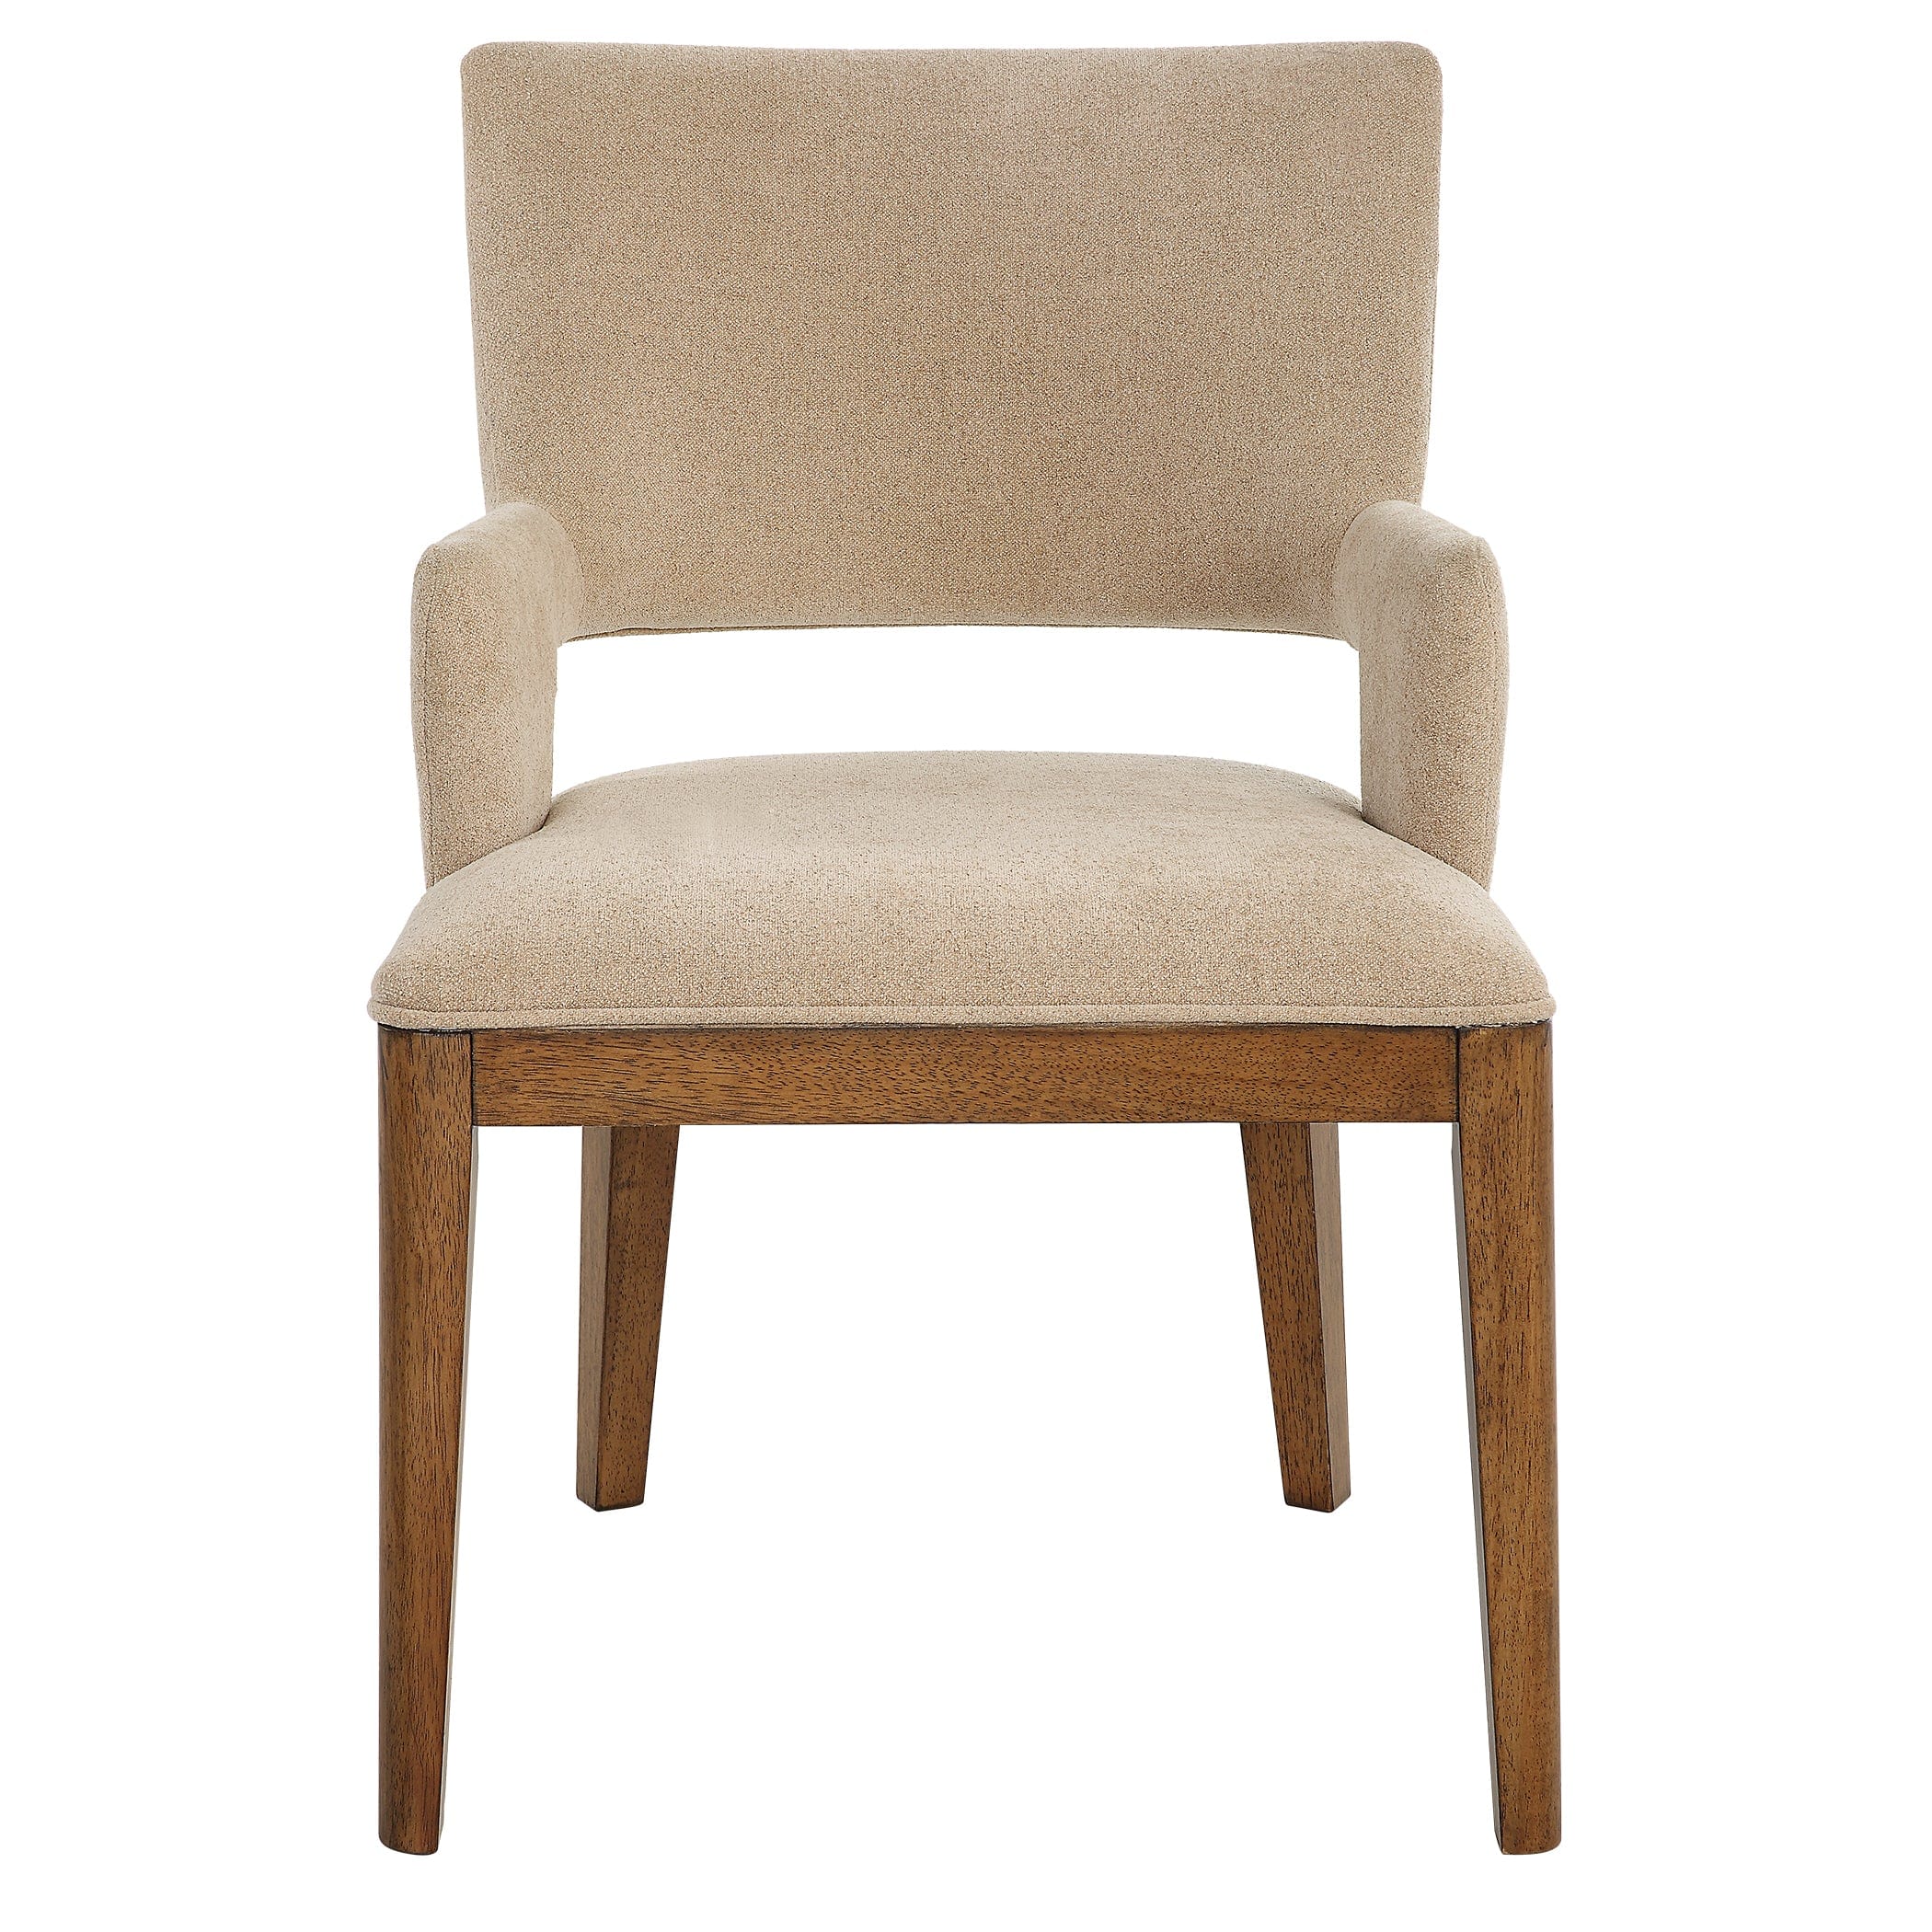 Aspect Mid-Century Dining Chair Uttermost